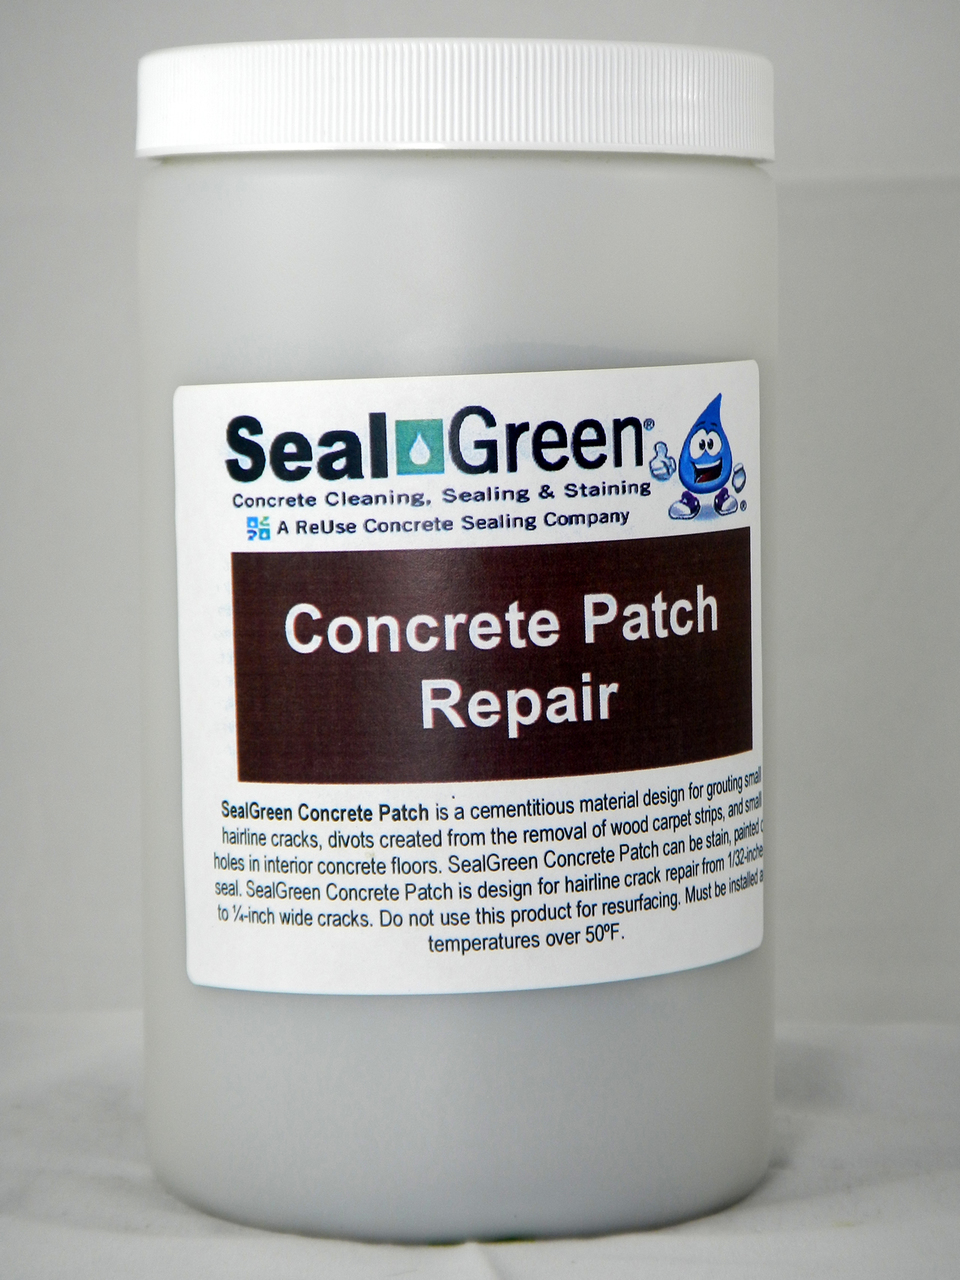 Concrete Patch Repair Material for Cracks, Holes in Concrete Questions & Answers